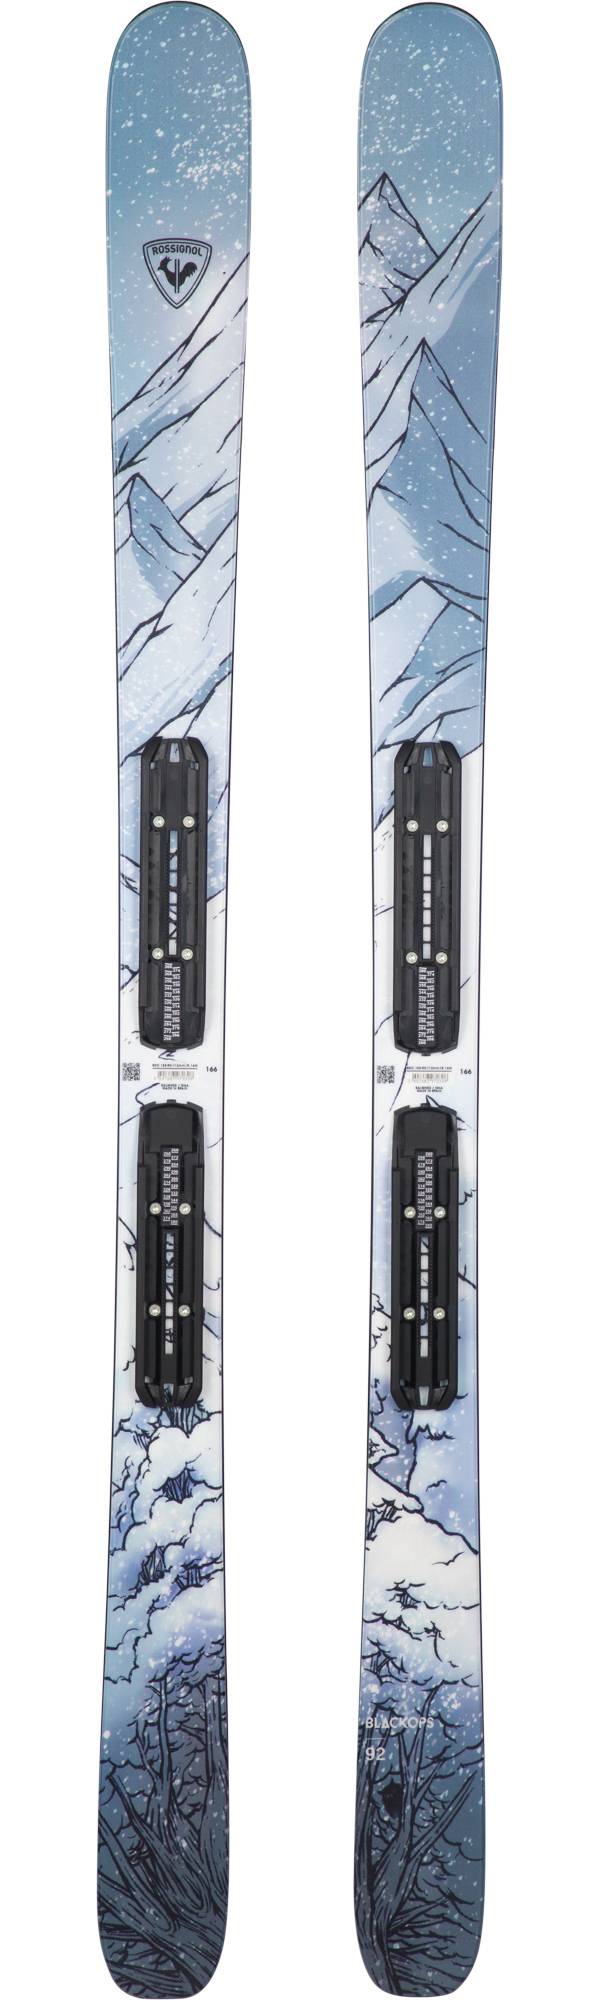 Rossignol Blackops Day 92 XPRS11GW All-Mountain Skis product image